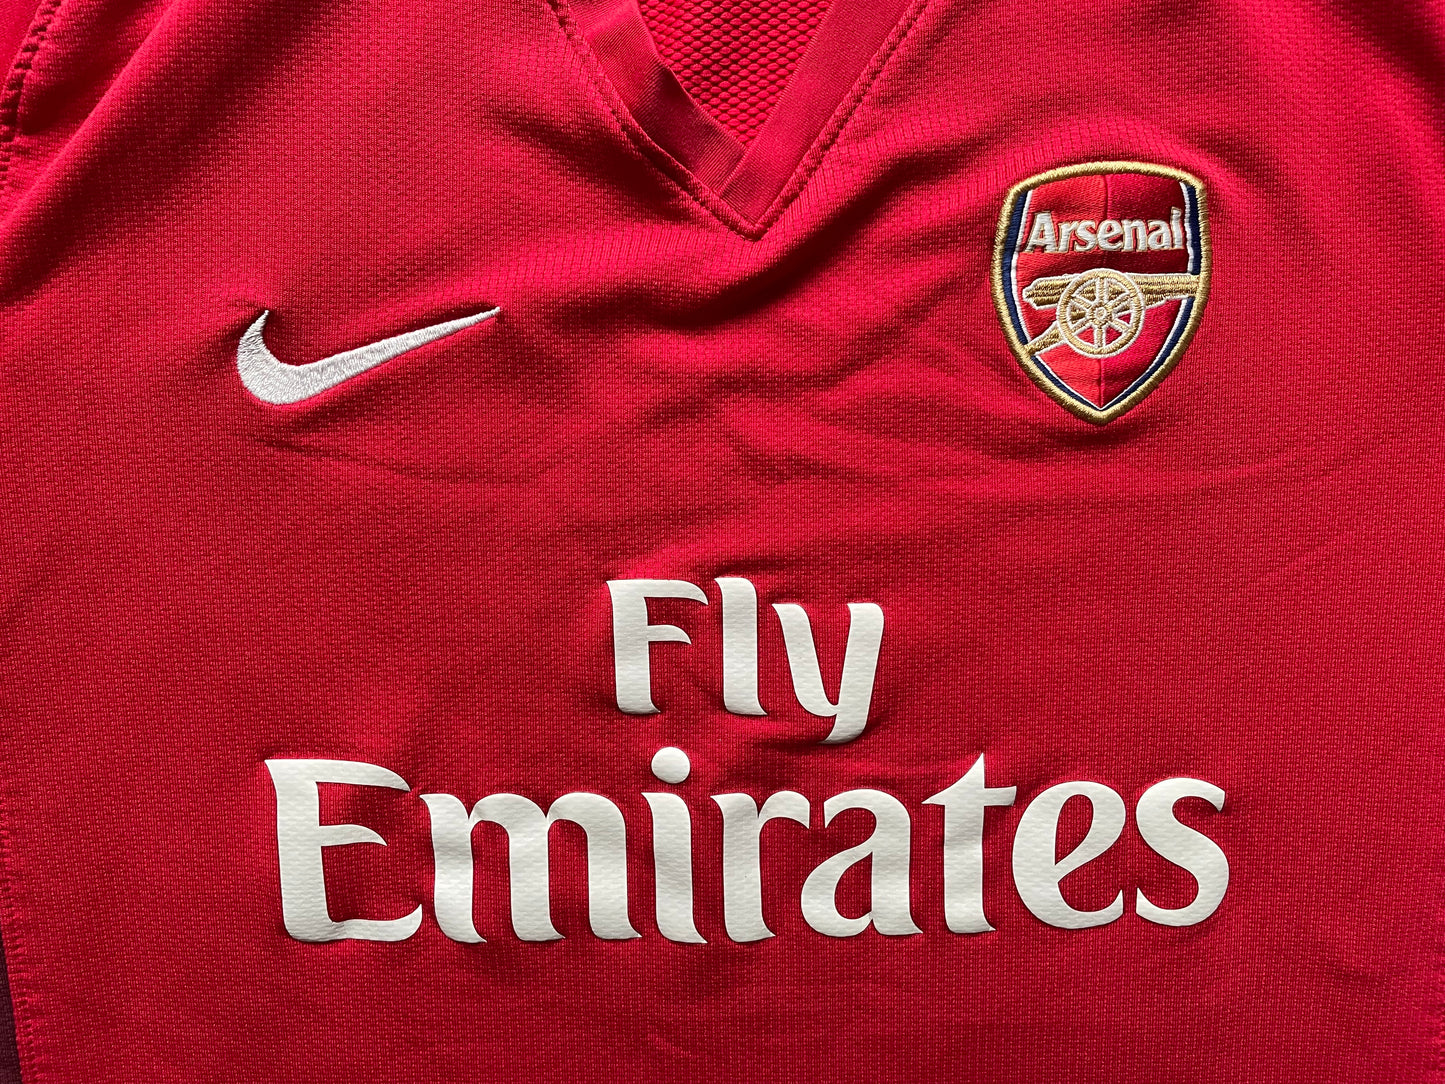 Arsenal 2008 Home Shirt (excellent) Adults XXS / Youths 152-158 12/13 years on tag